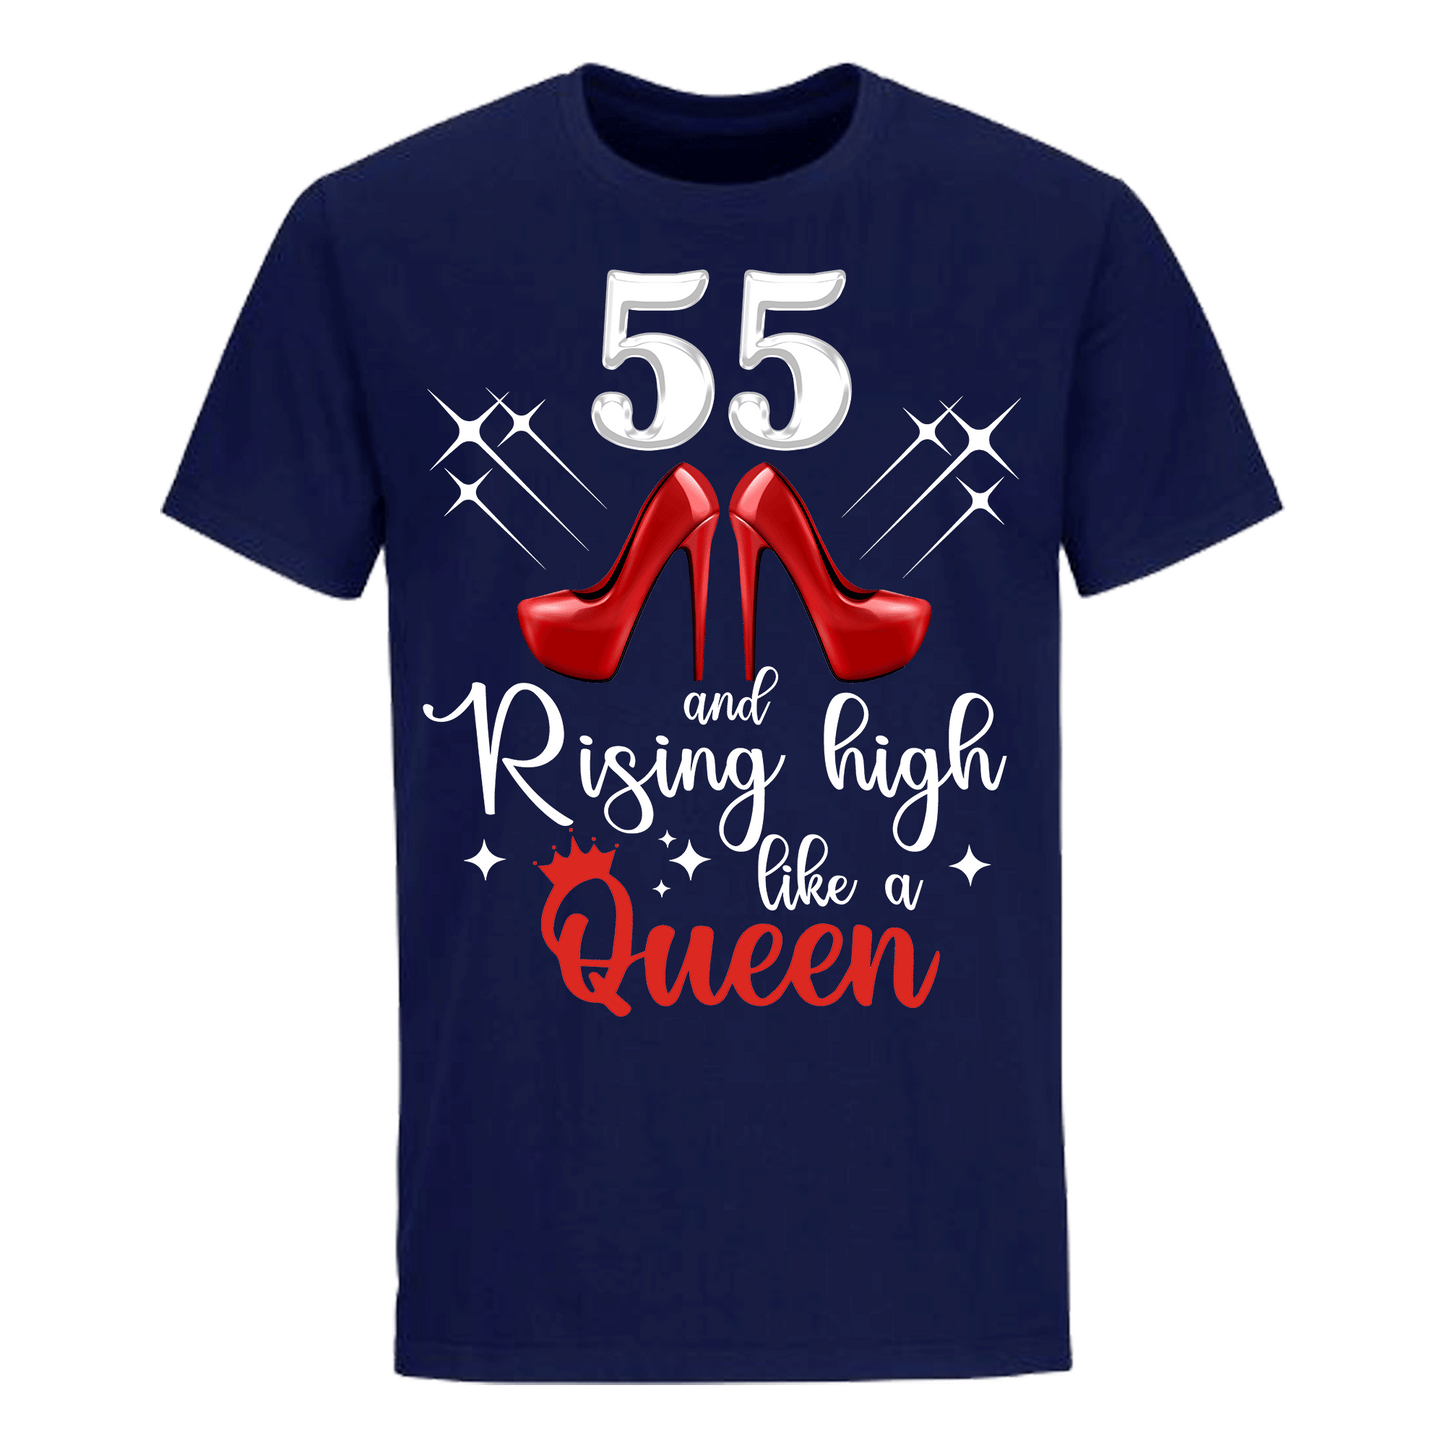 55 and Rising High like a queen unisex shirt